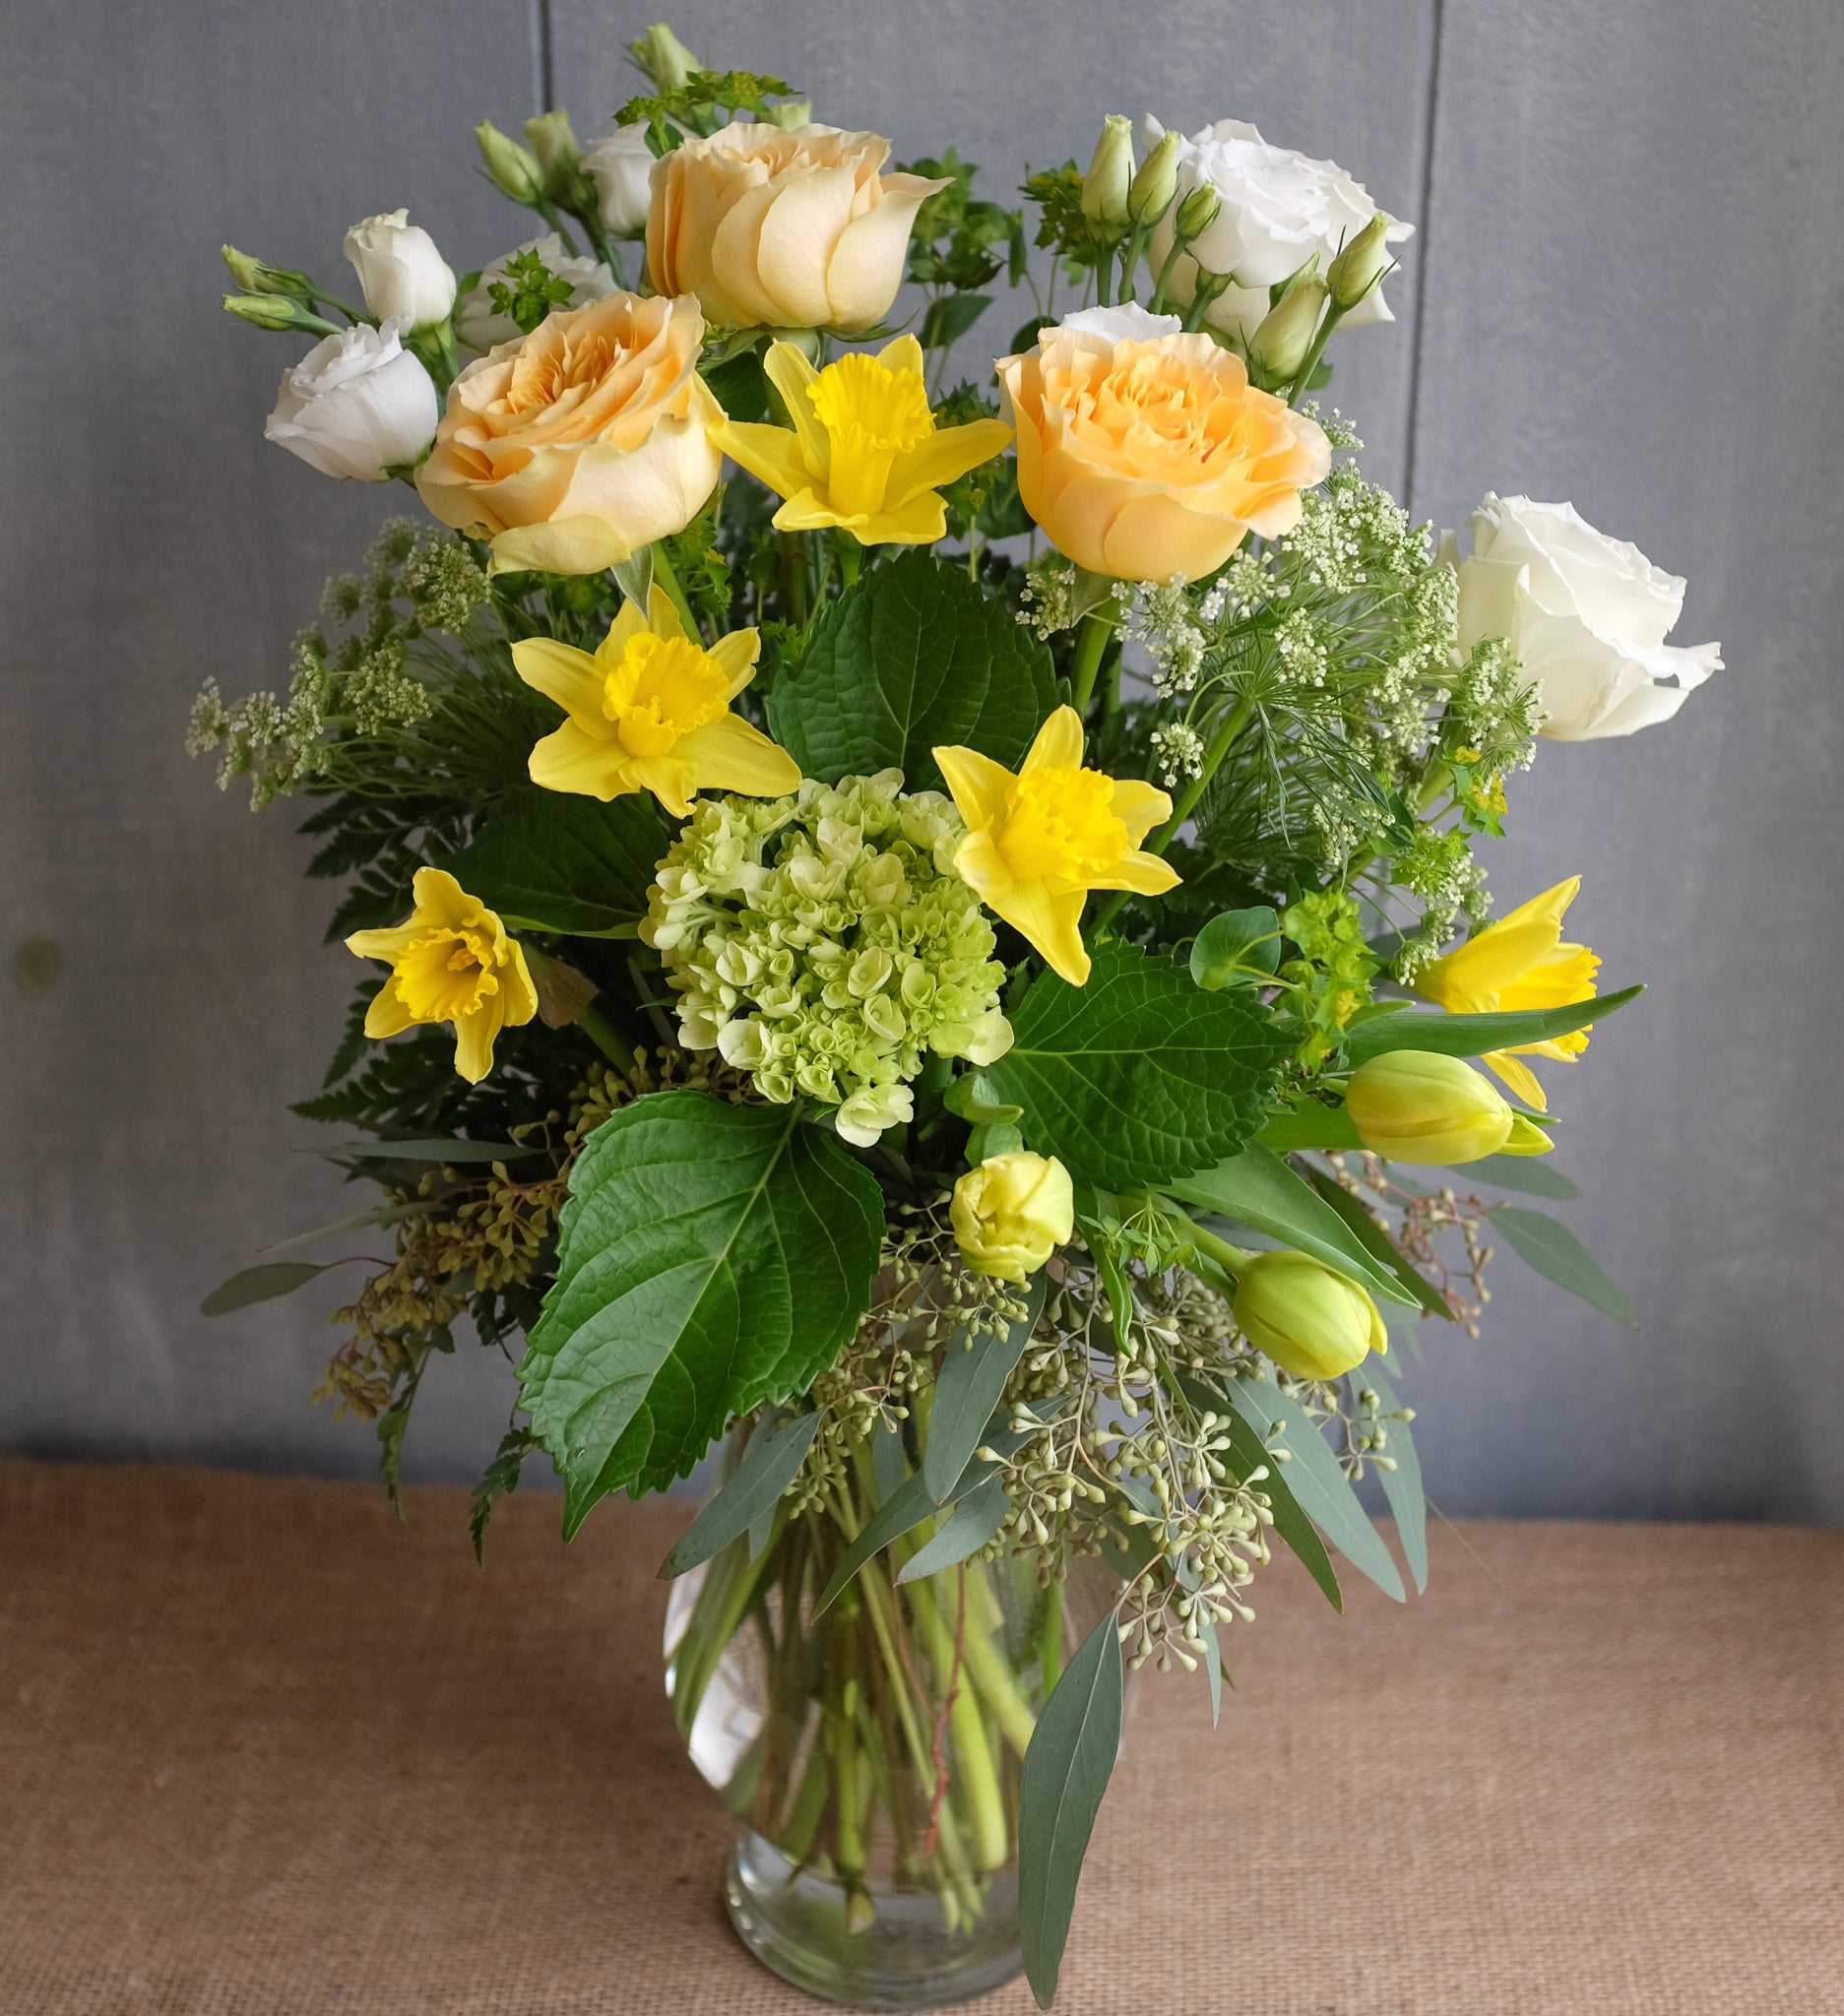 Elegant floral bouquet in white, yellow and green